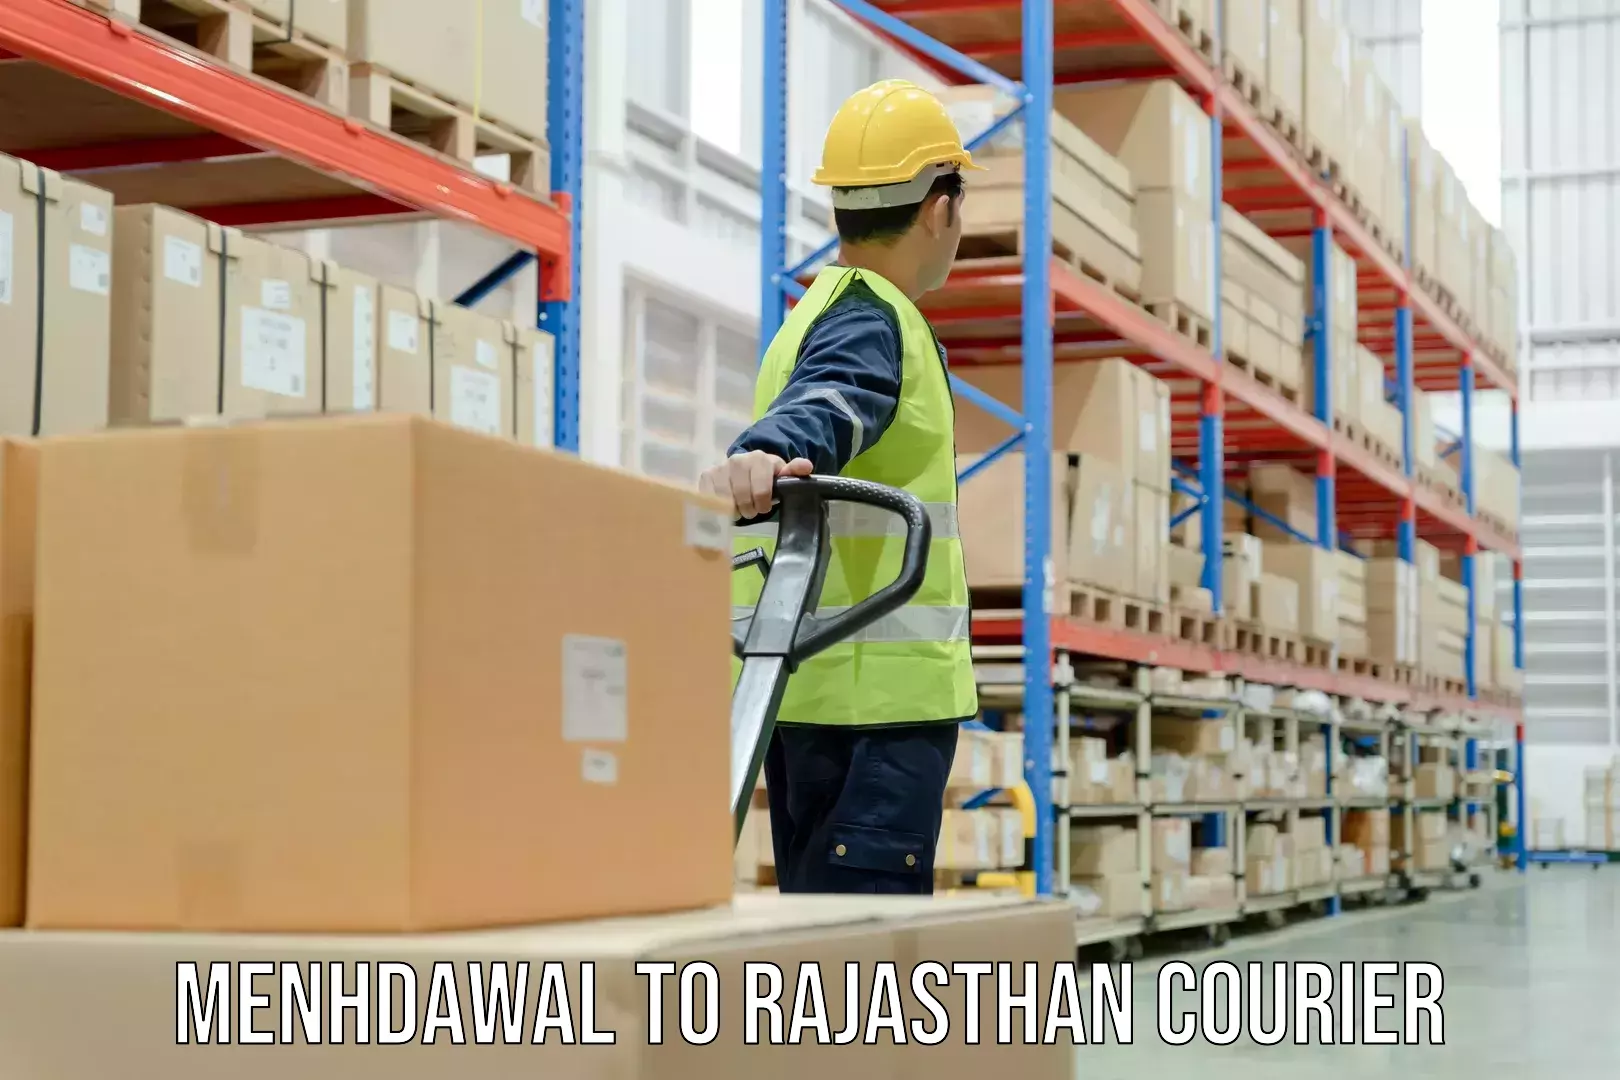 Nationwide delivery network Menhdawal to Rajasthan